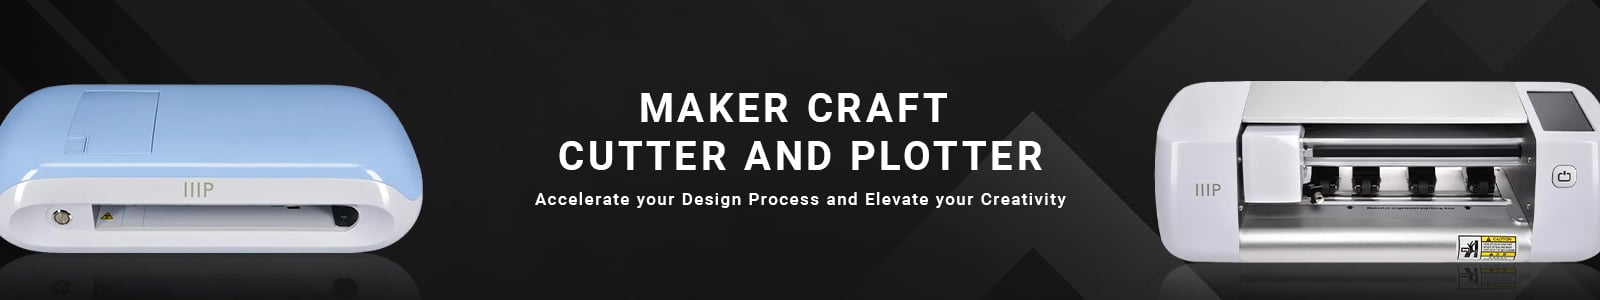 Maker Craft Cutter and Plotter
Accelerate your Design Process and Elevate your Creativity